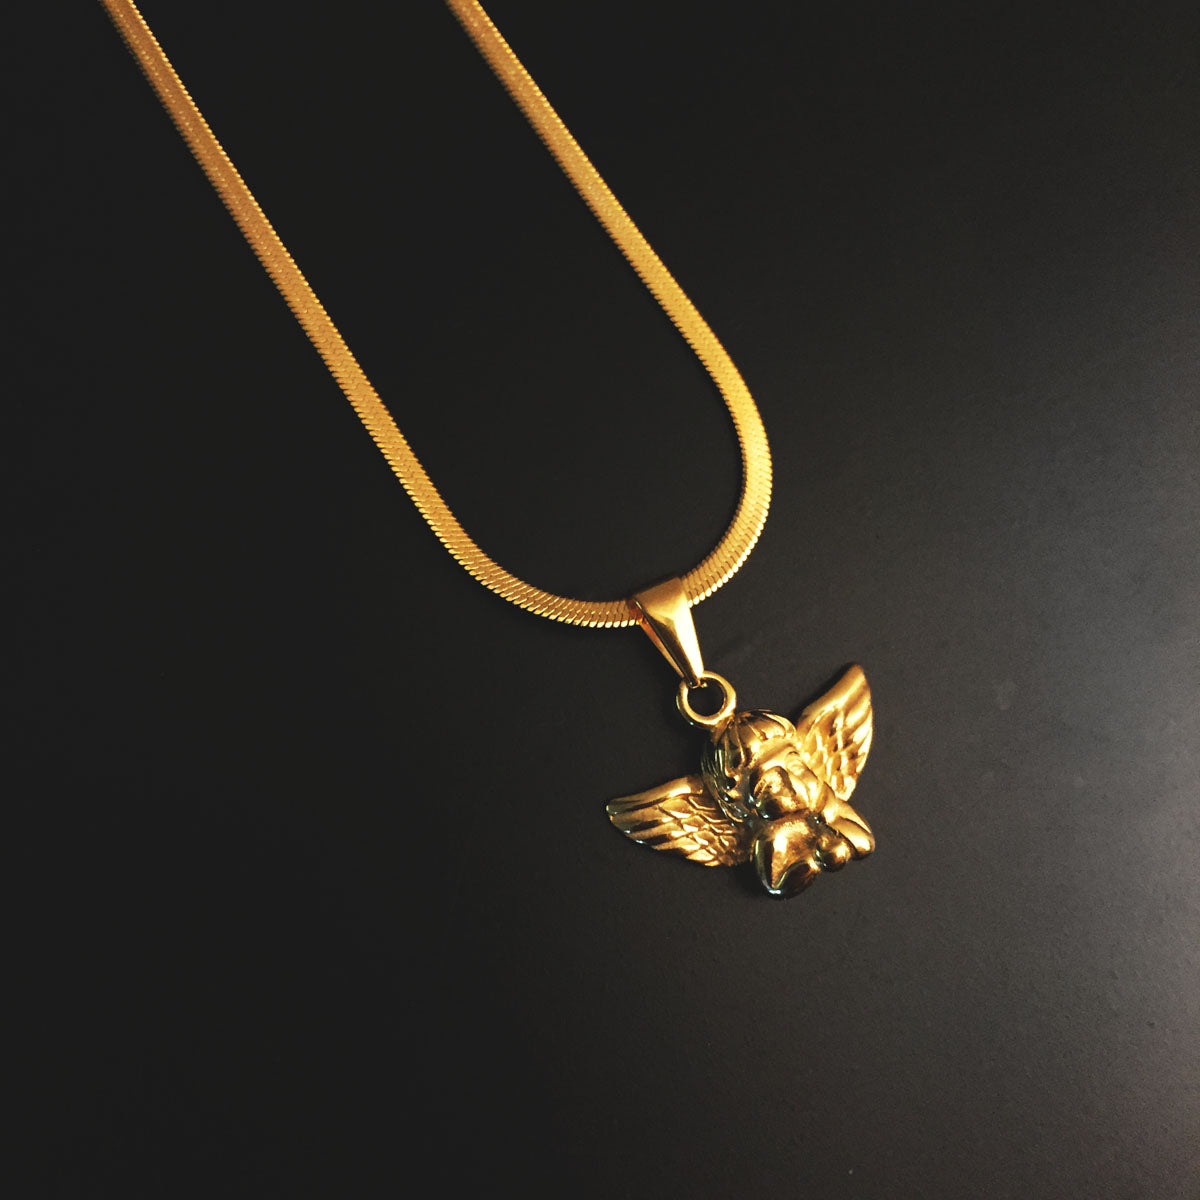 Mini Cherub - Necklace - Cold Gold Mens Gold Urban Contemporary Hiphop Jewelry